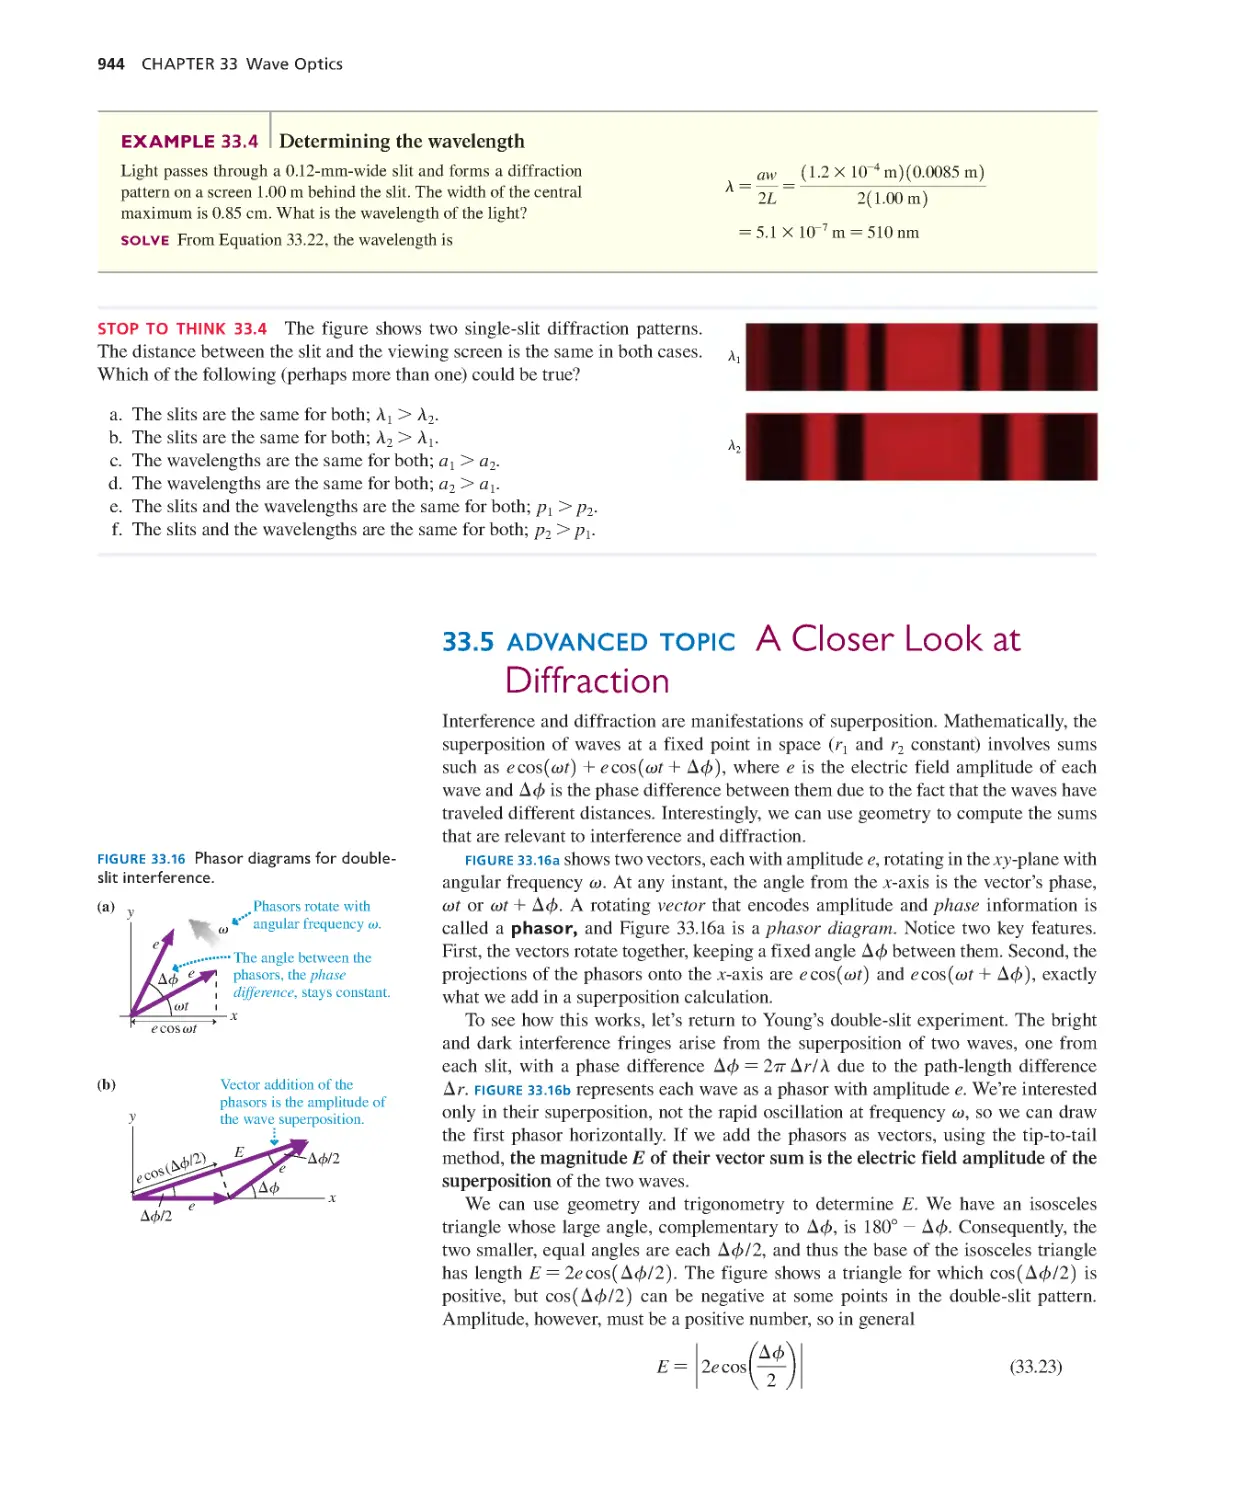 33.5. Advanced Topic: A Closer Look at Diffraction